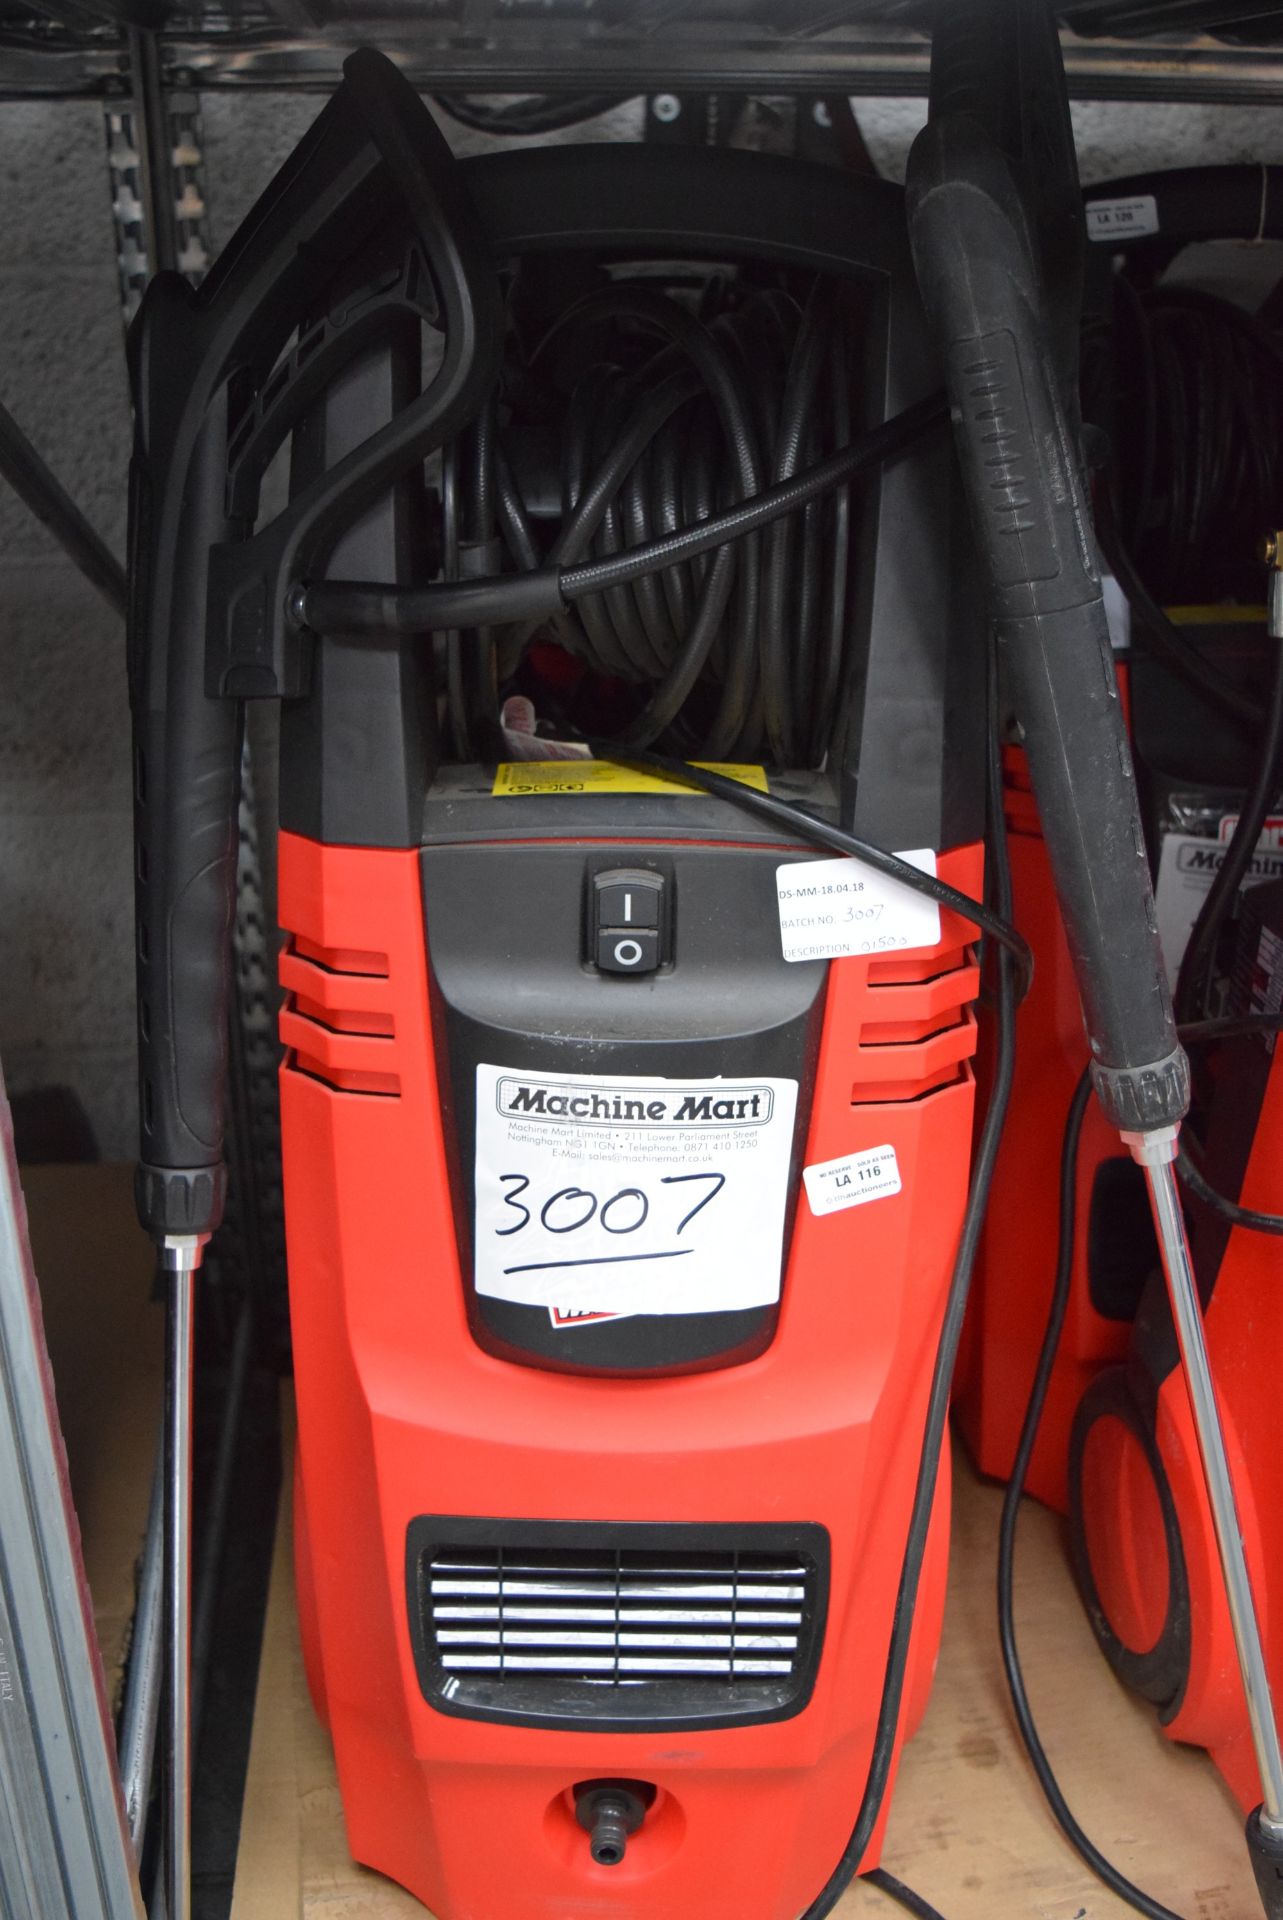 1 x CLARKE JET 9000 PRESSURE WASHER RRP £150 18.04.18 3007 *PLEASE NOTE THAT THE BID PRICE IS